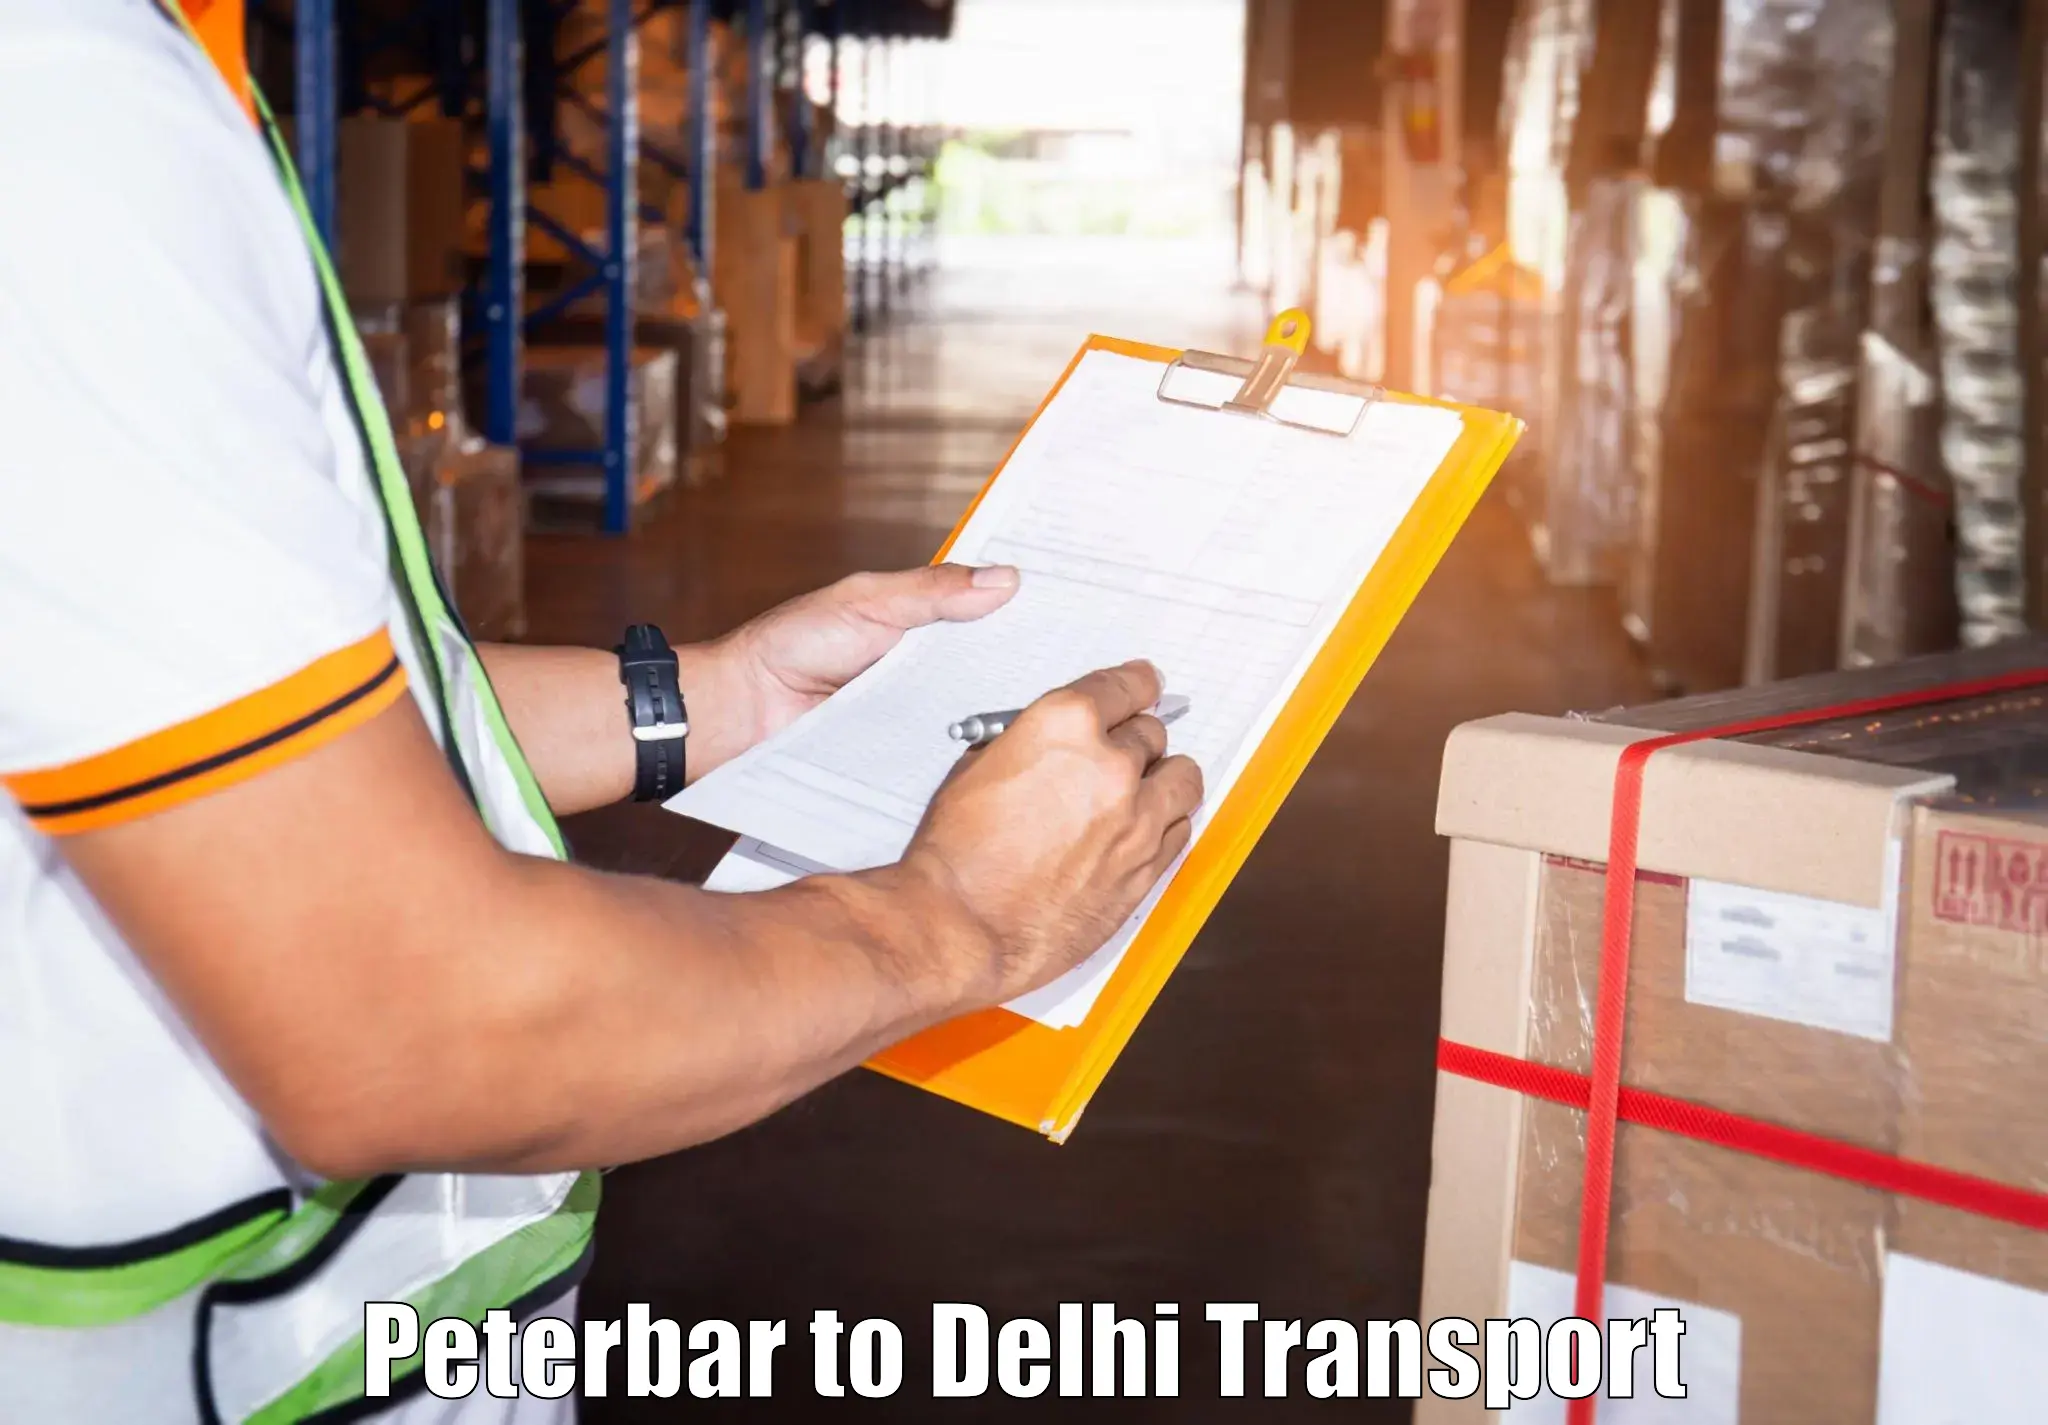 Transport bike from one state to another Peterbar to Delhi